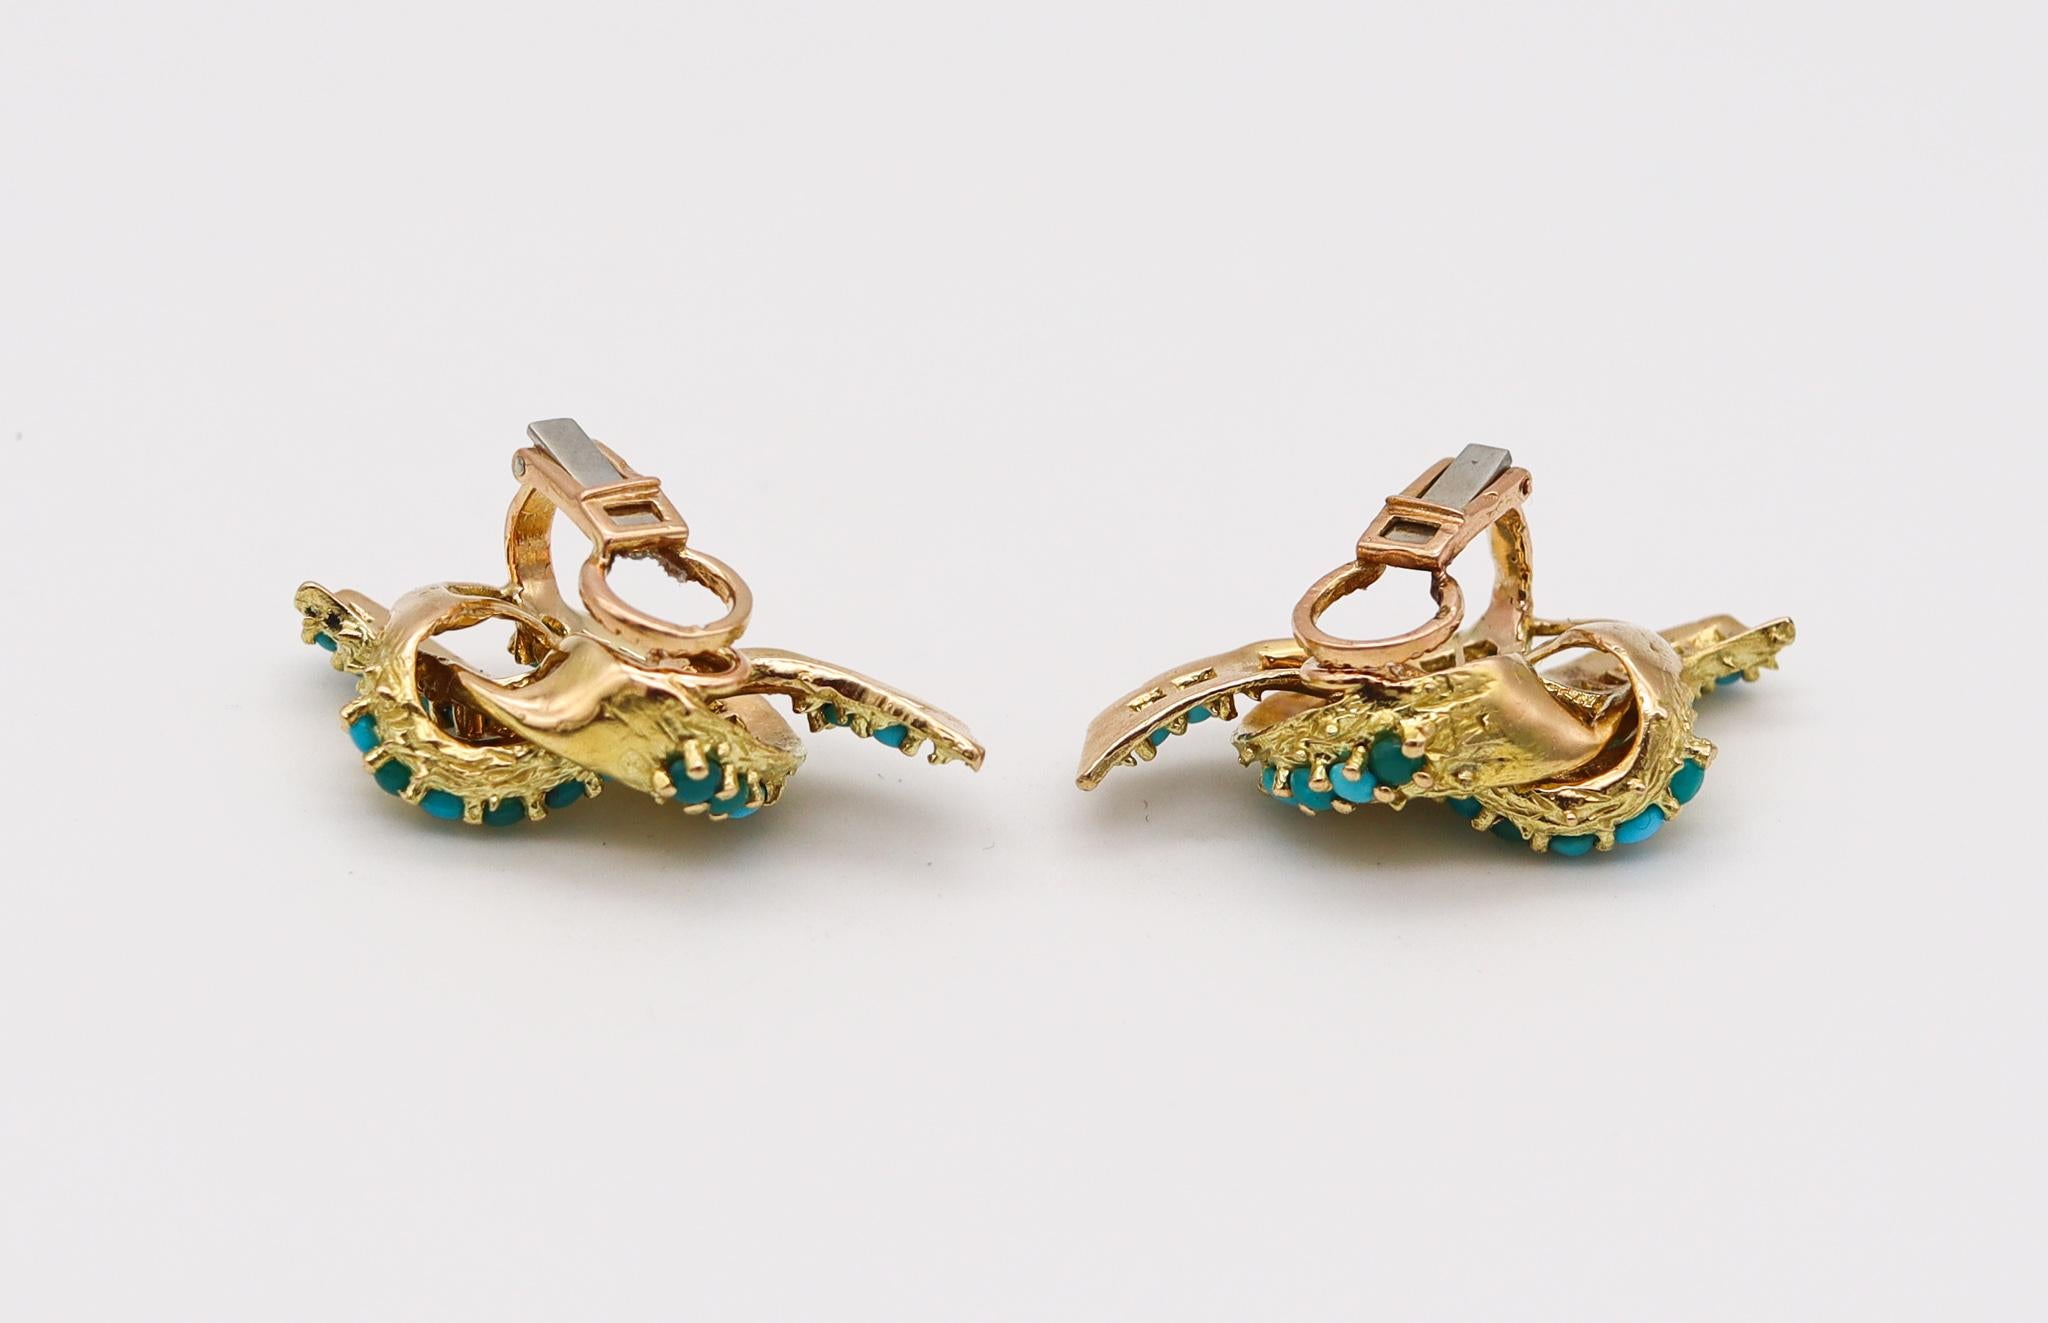 Textured love knots earrings designed by Tiffany & Co. 

Beautiful and unusual pair of clips earrings, created in Paris France for Tiffany & Co. back in the 1960's. These sculptural pair has been crafted in the shape of a love knots in solid yellow